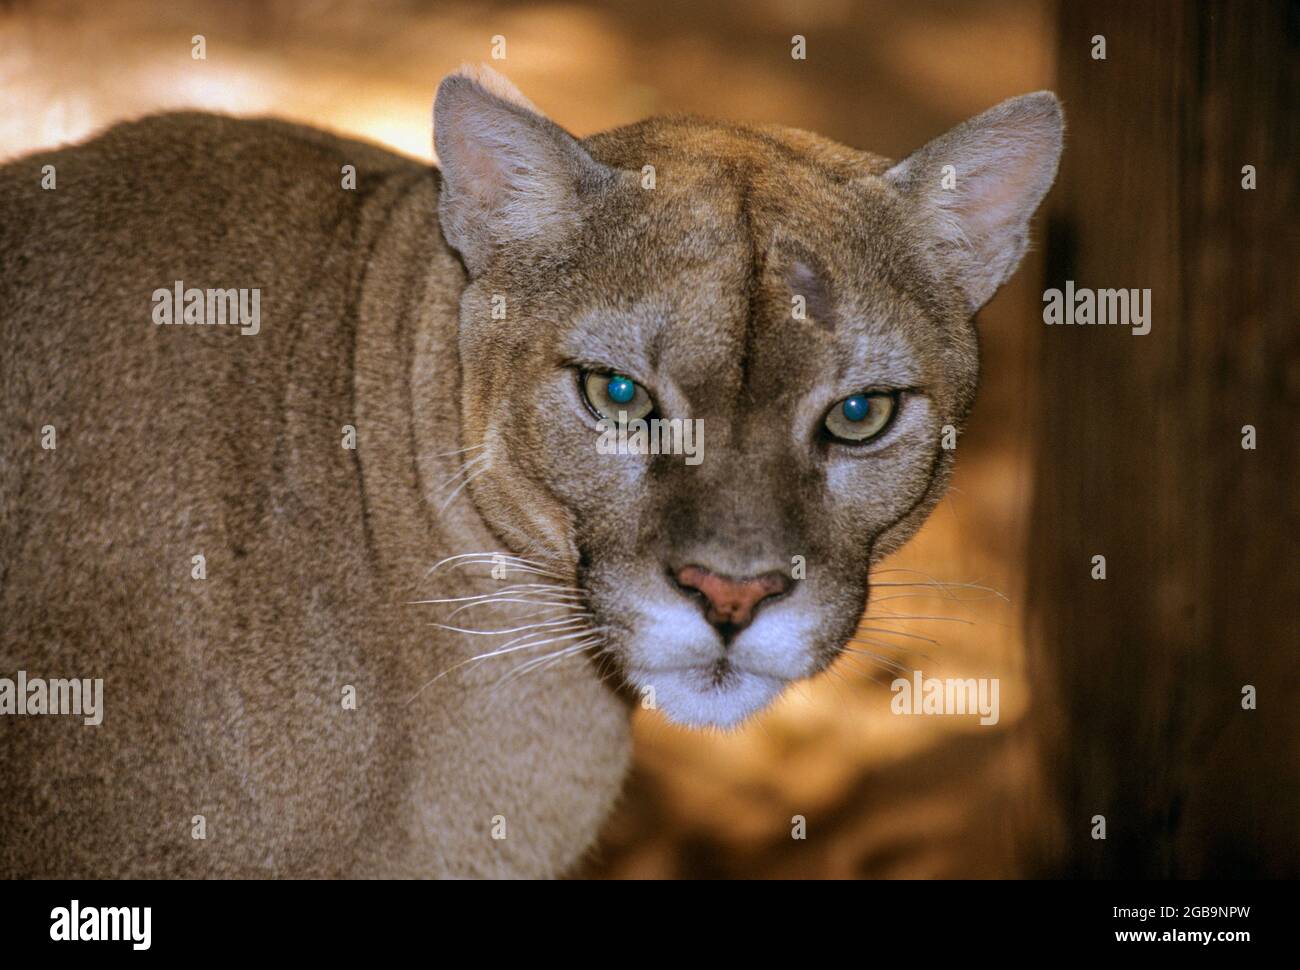 The cougar (Puma concolor) is a large cat of the subfamily Felinae. Native to the Americas, its range spans from the Canadian Yukon to the southern An Stock Photo